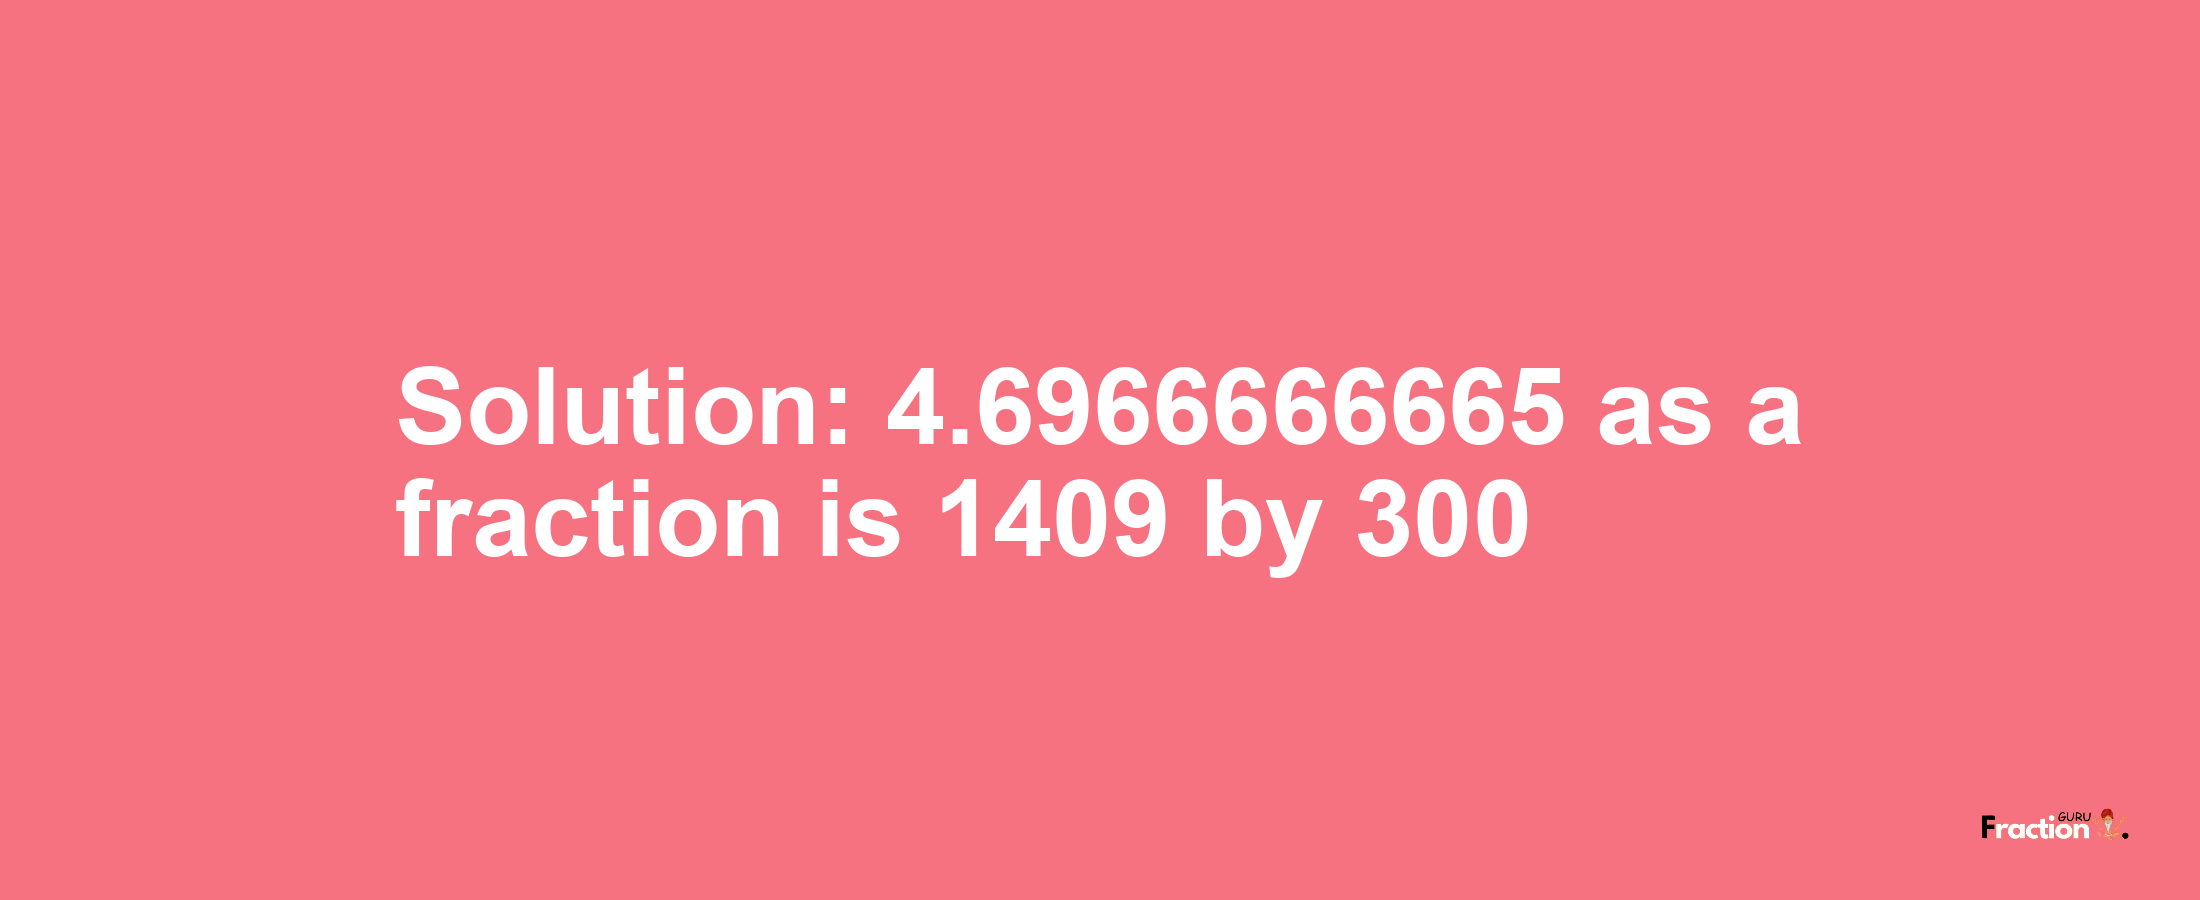 Solution:4.6966666665 as a fraction is 1409/300